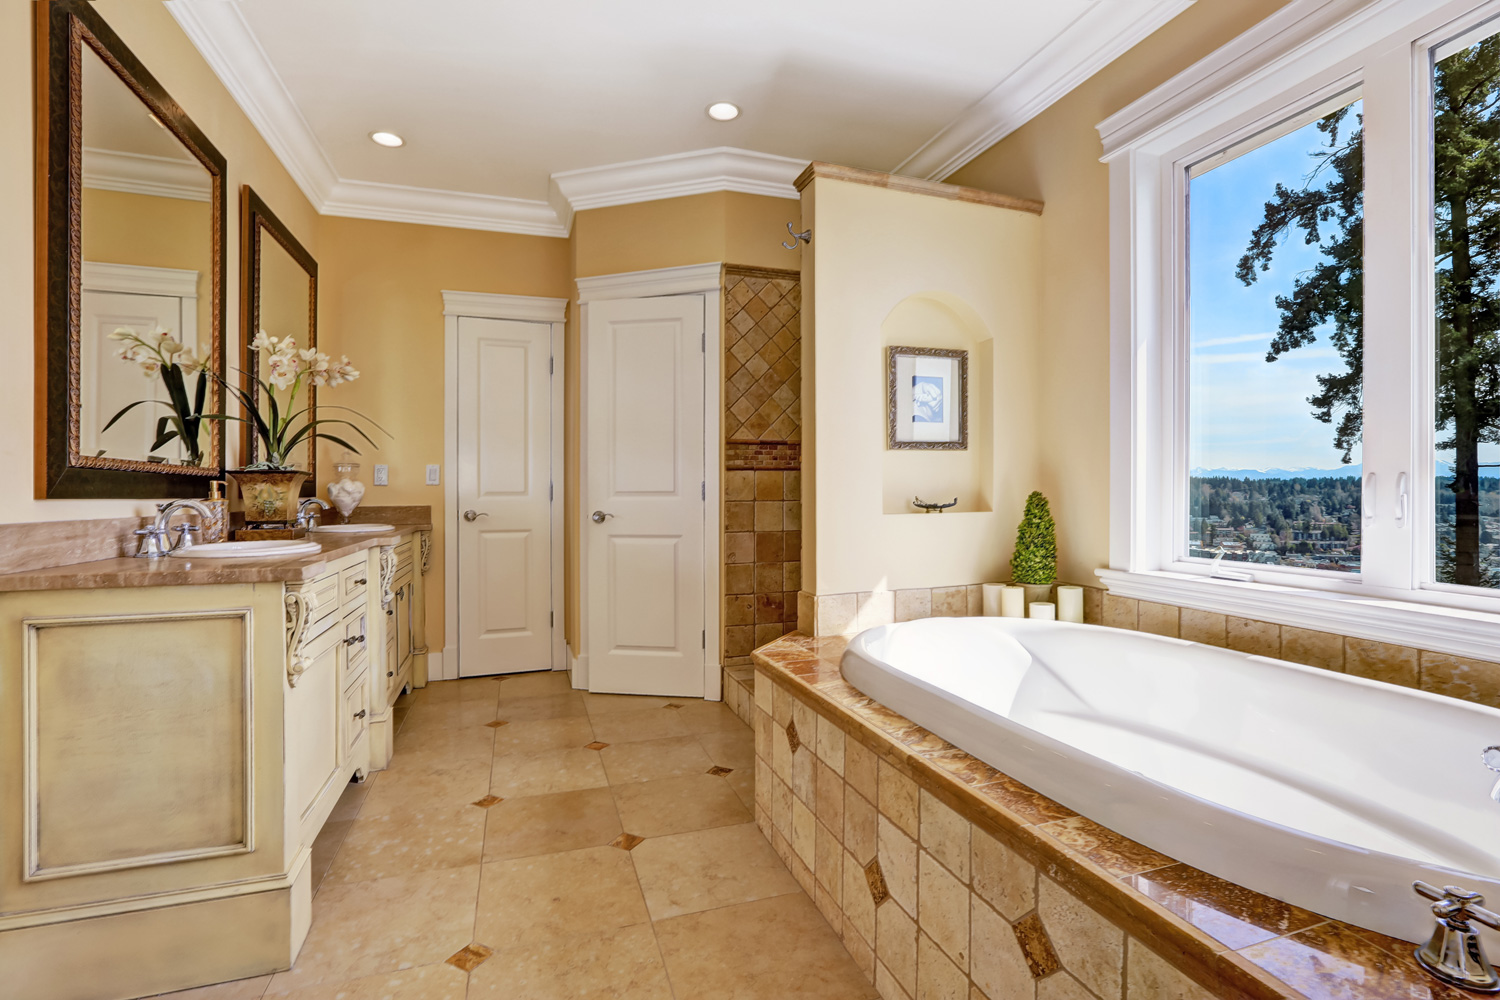 Soft tones bathroom interior with tile floor and tile wall trim, antique vanity with mirror and round bath tub in luxury house